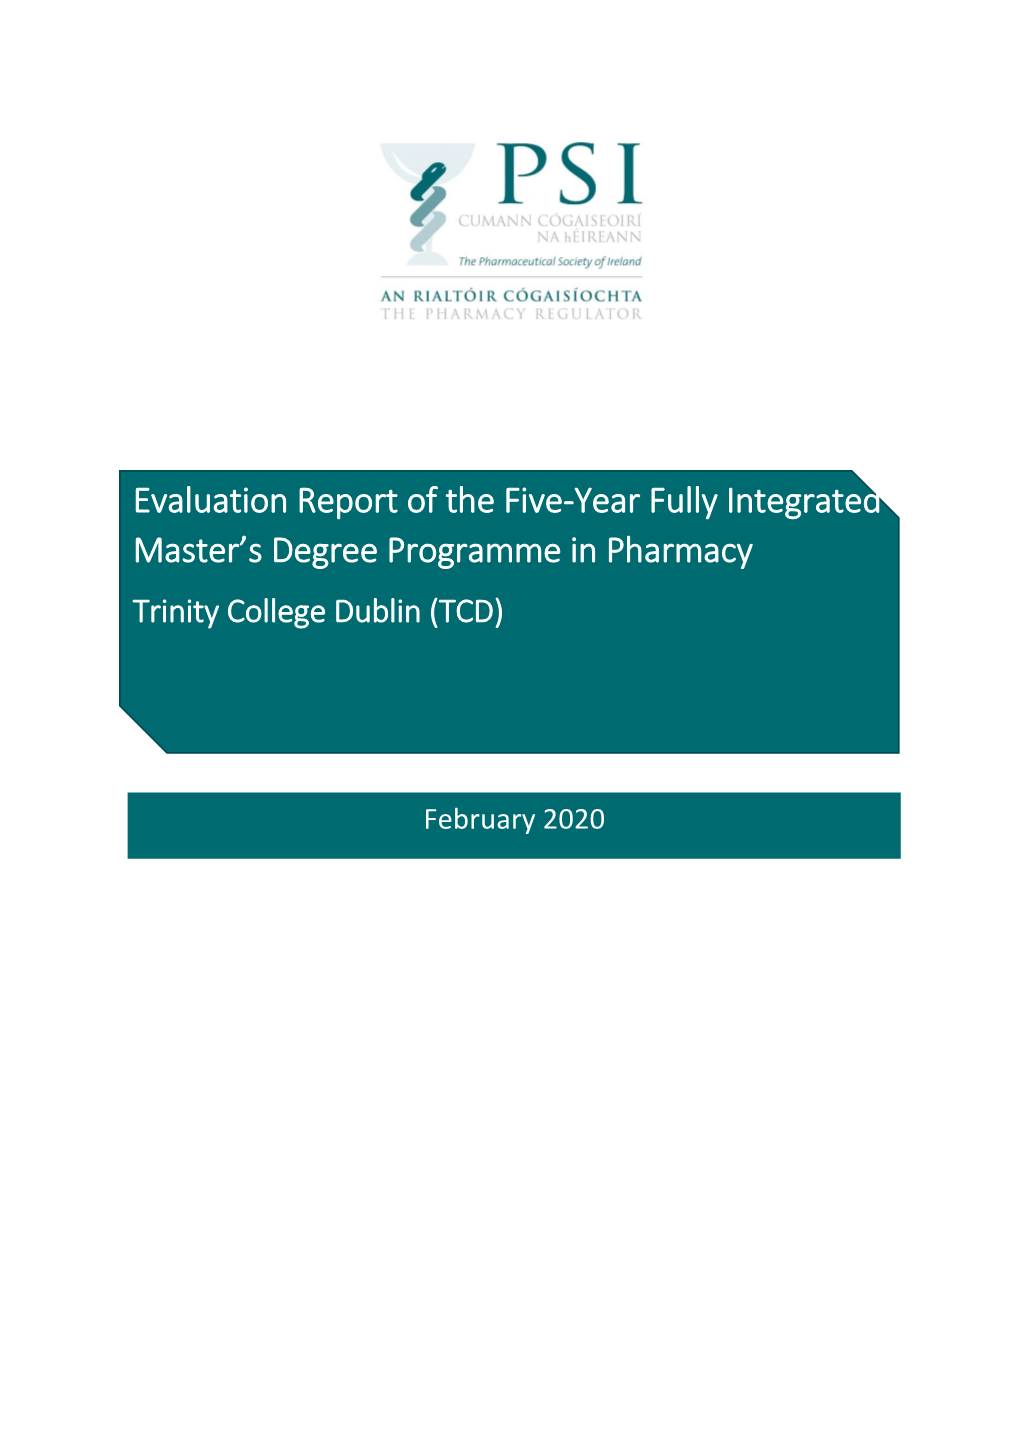 Evaluation Report of the Five-Year Fully Integrated Master's Degree